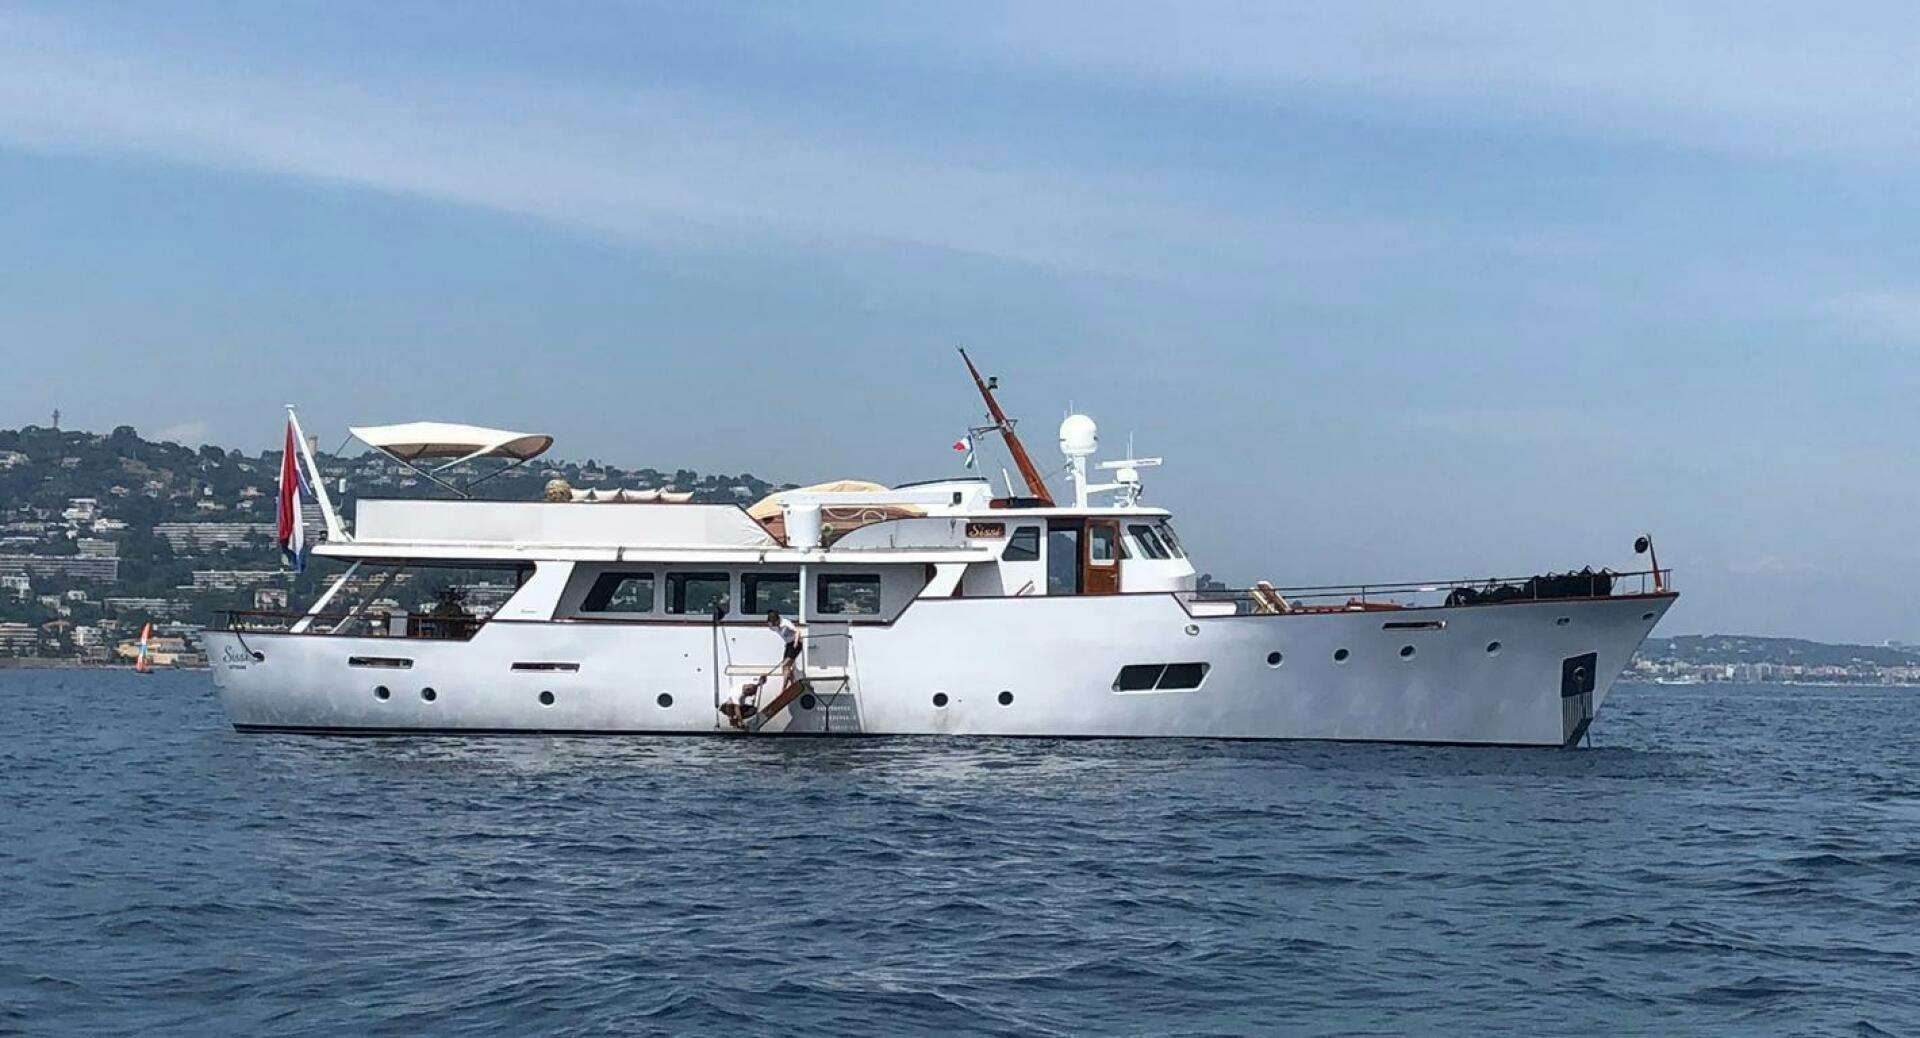 Sissi
Yacht for Sale